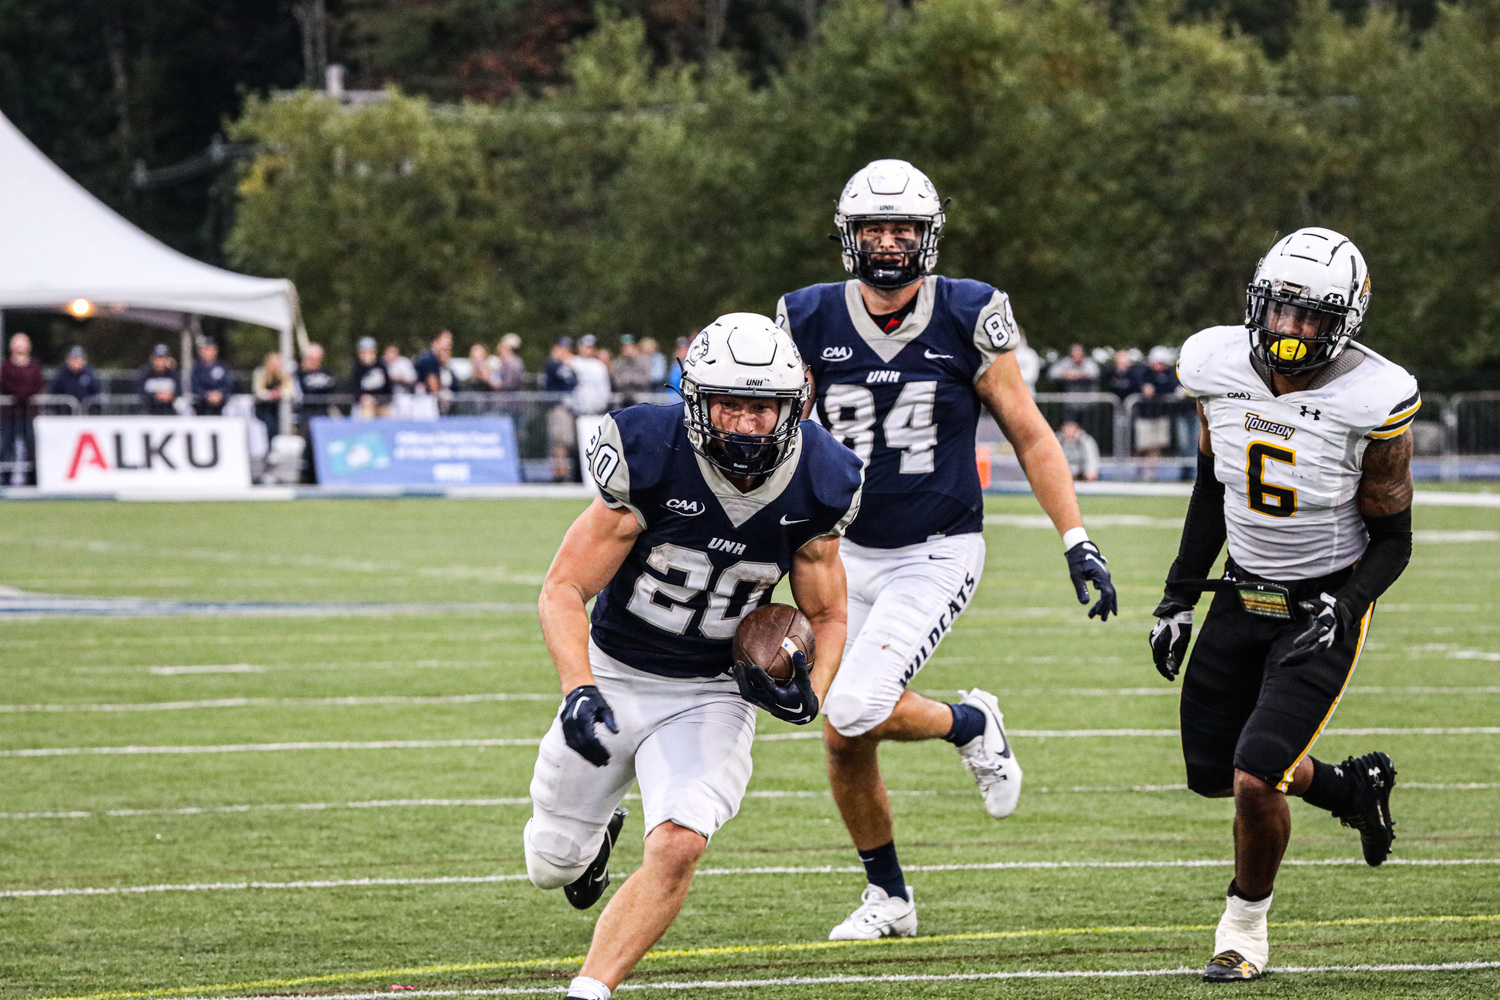 Former Westhampton Beach running back Dylan Laube set a Long Island record with 47 touchdowns his senior year. UNIVERSITY OF NEW HAMPSHIRE ATHLETICS